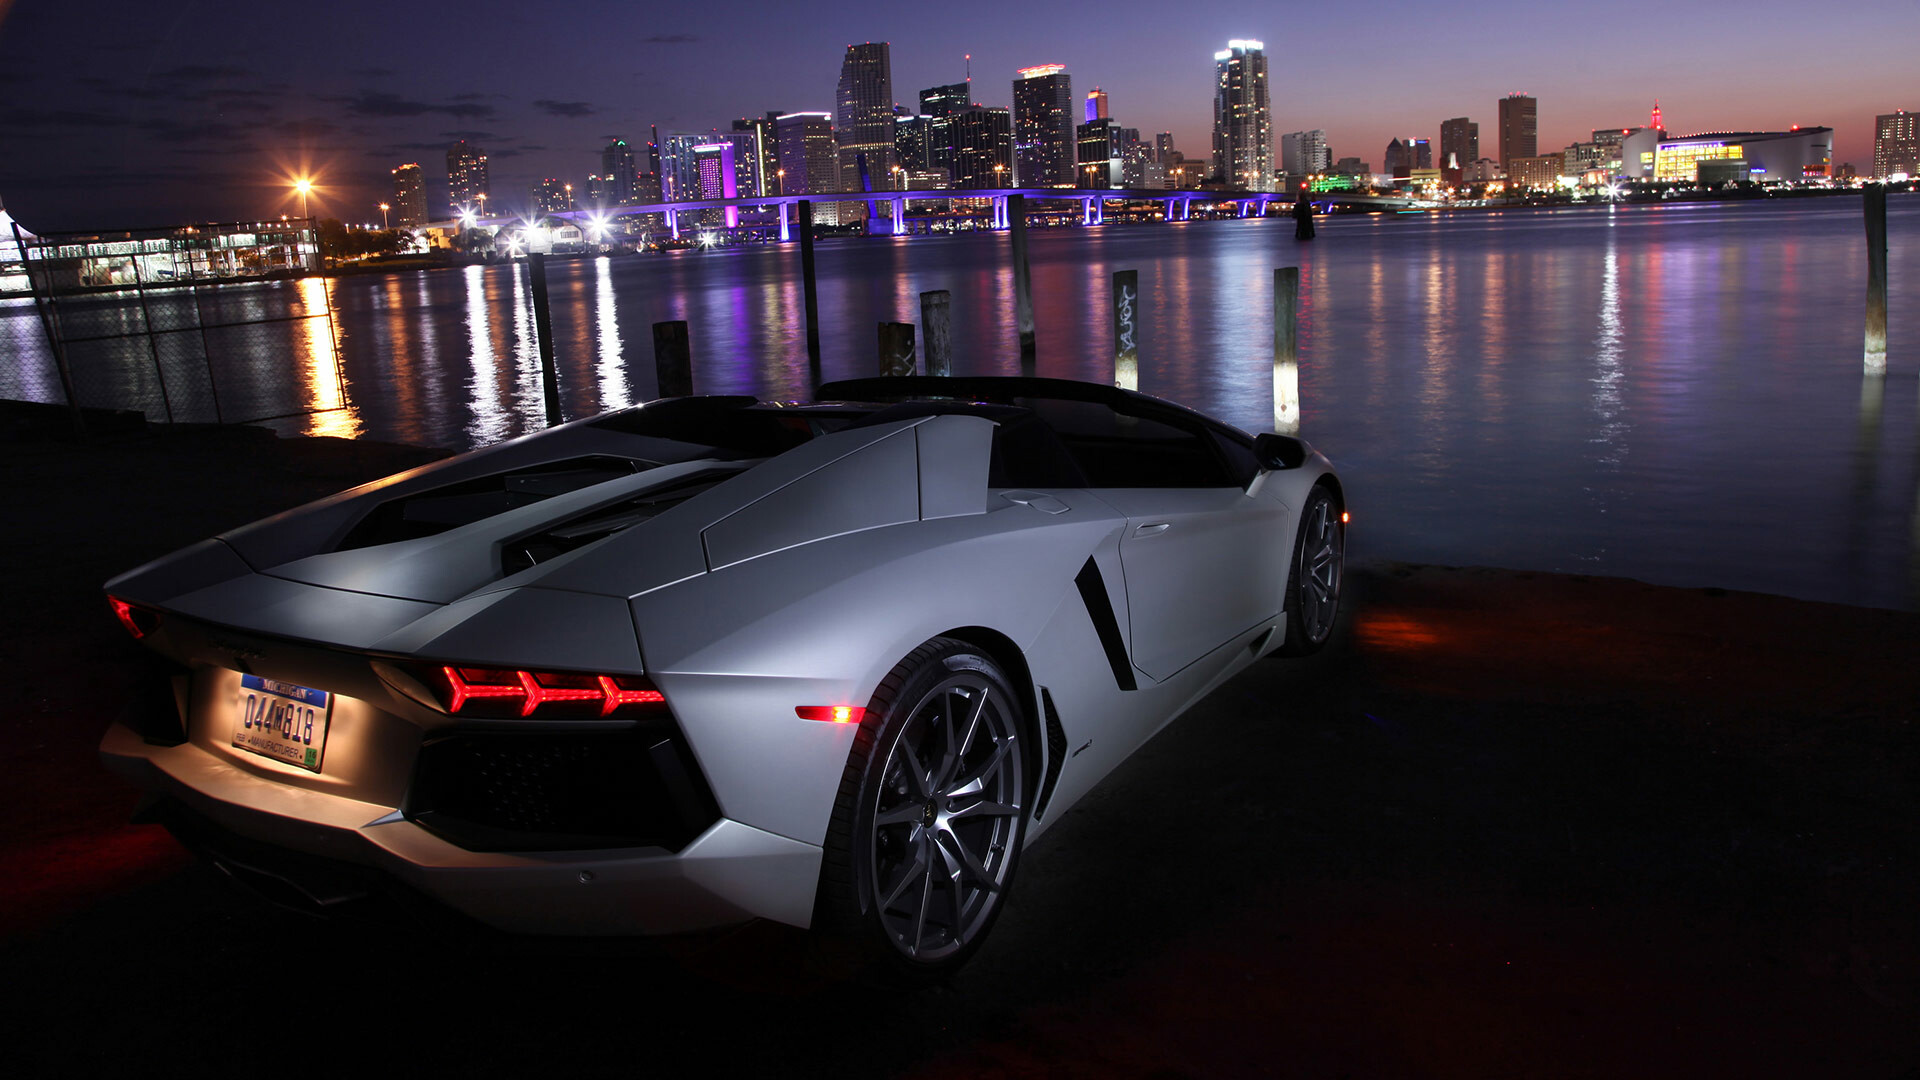 Lamborghini: The Aventador debuted on 1 March 2011 at the 2011 Geneva Motor Show. 1920x1080 Full HD Background.